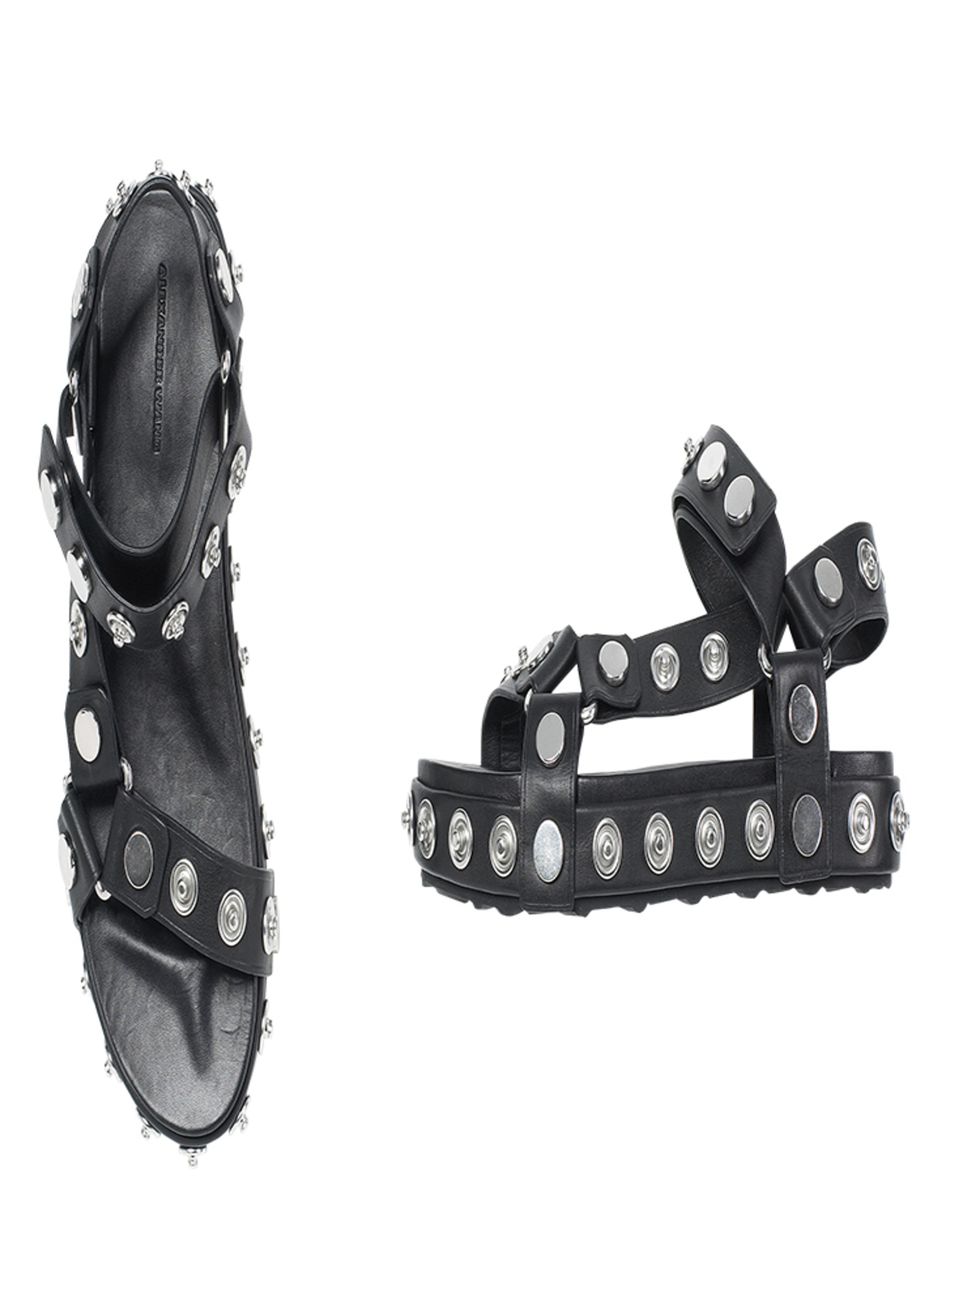 Studded leather sandals, £610, Alexander Wang